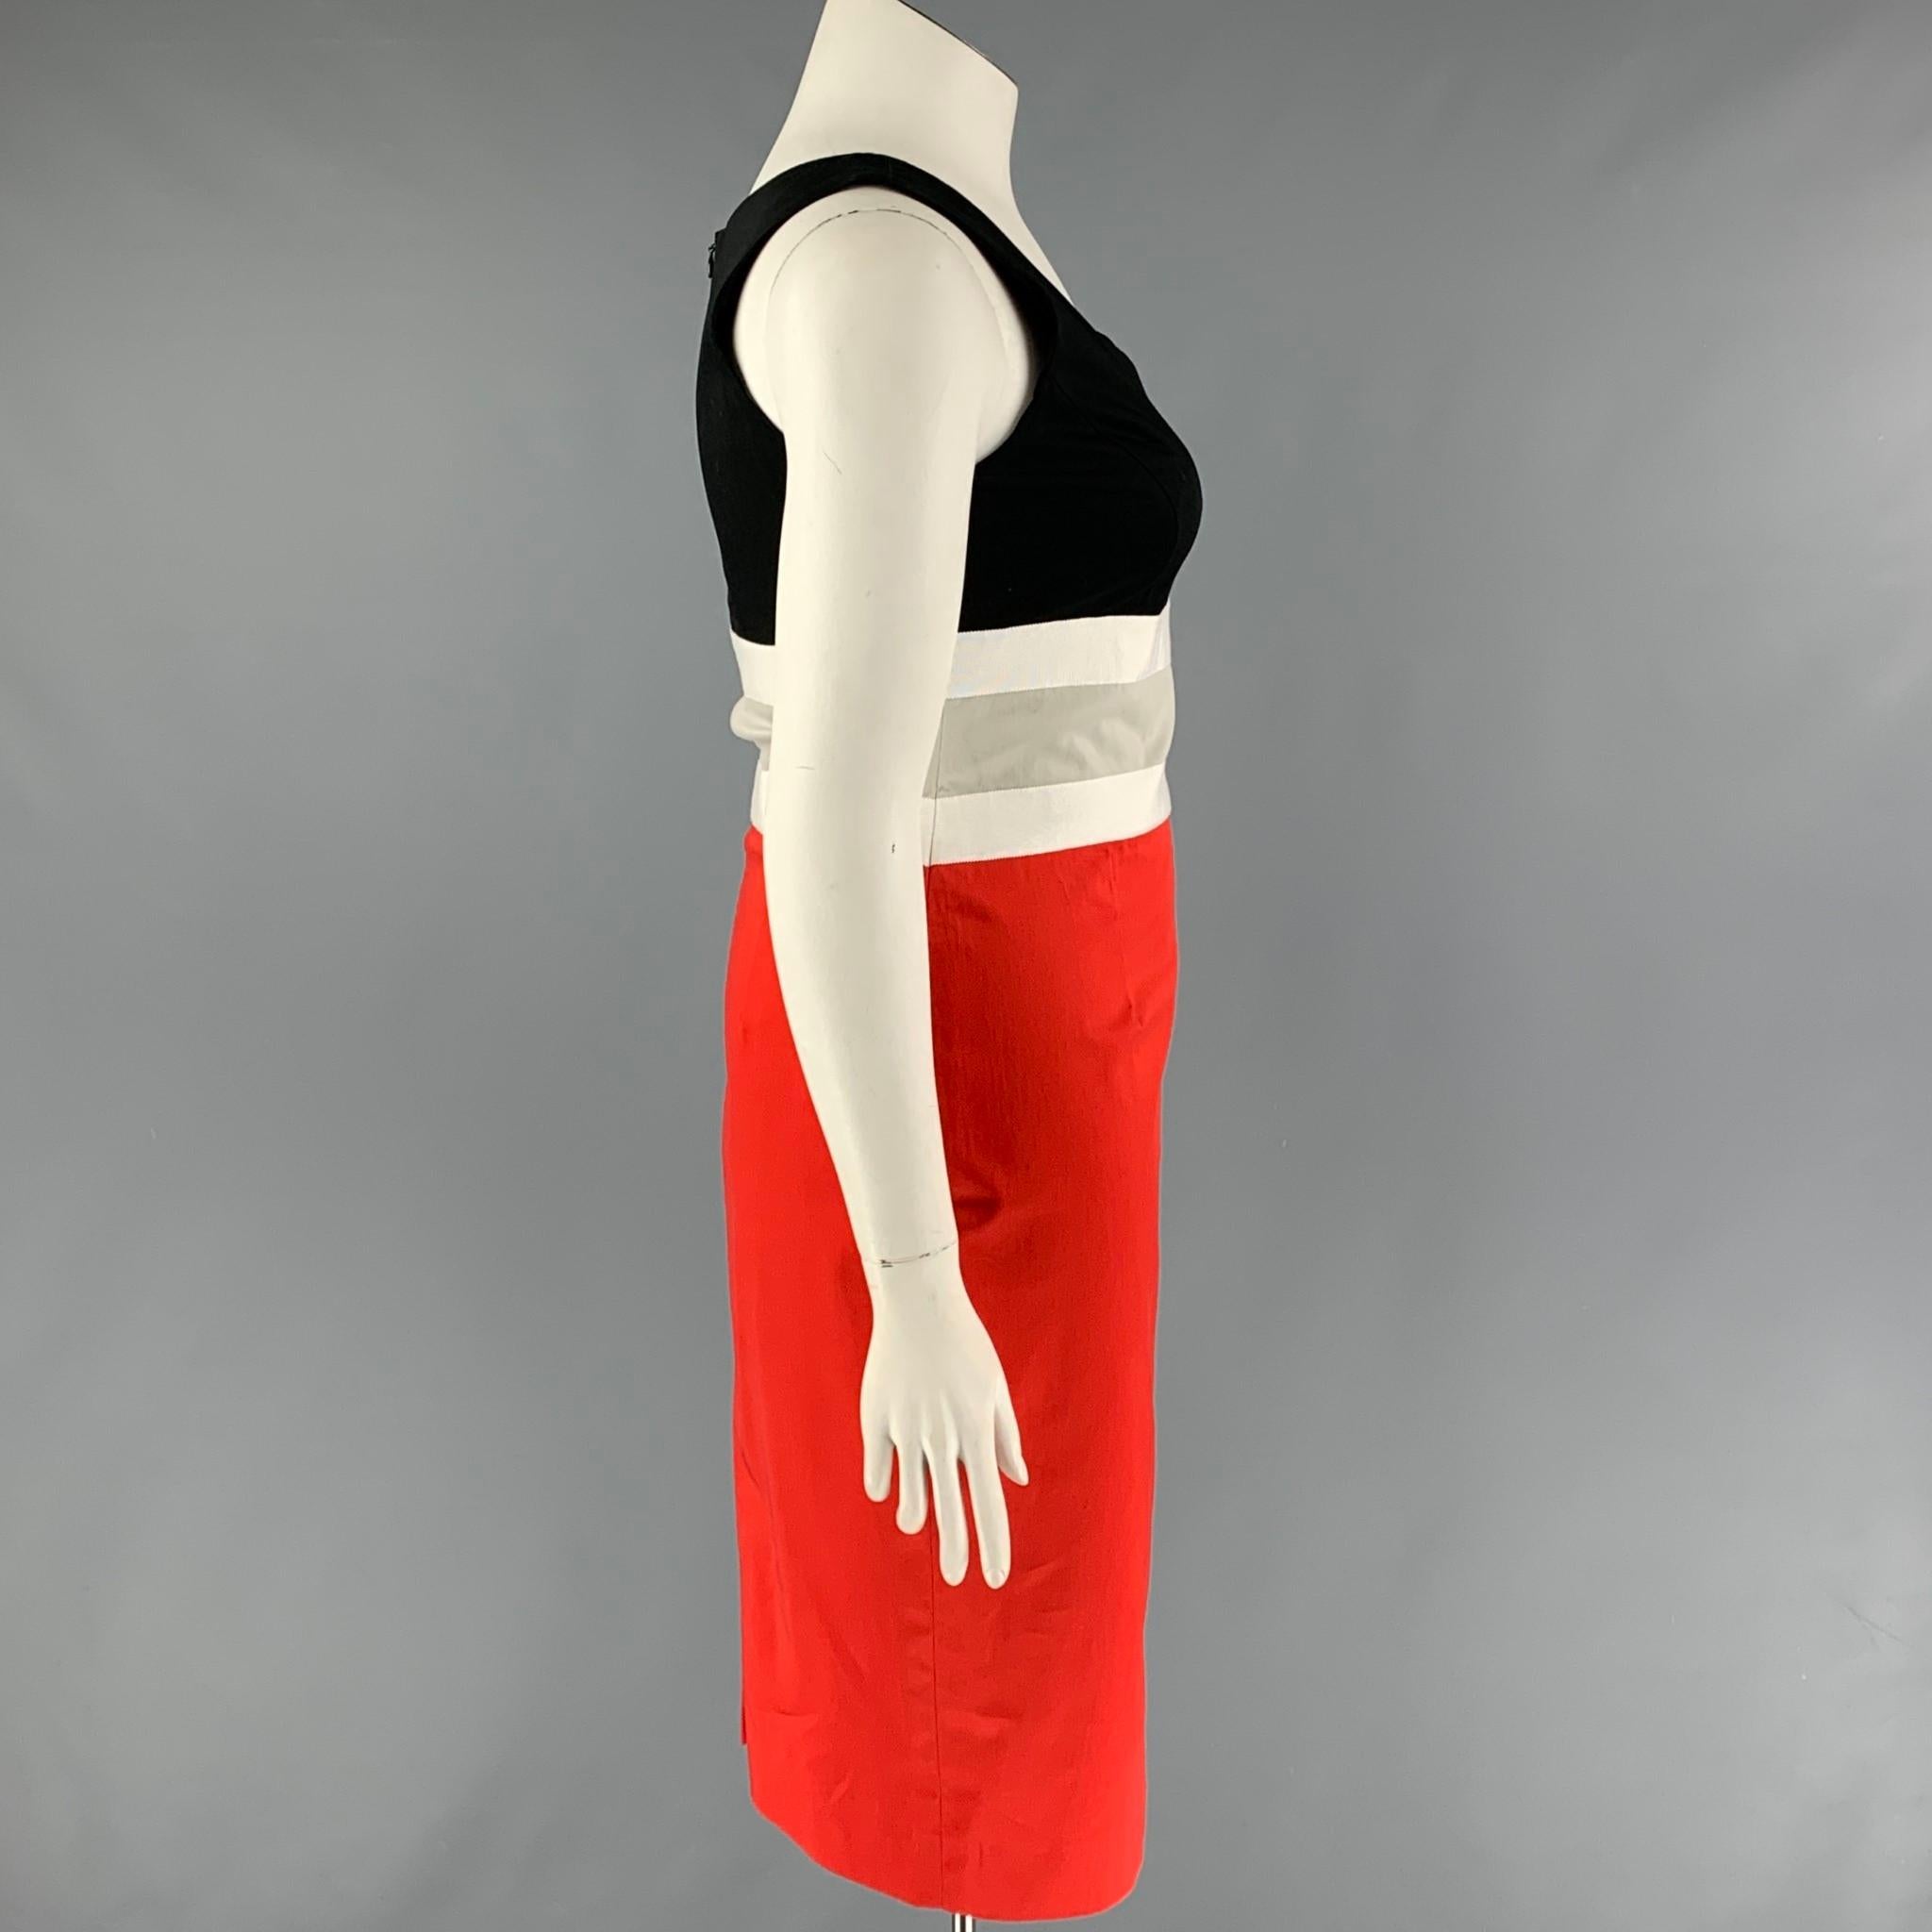 CAROLINA HERRERA dress comes in a red & black color block cotton featuring a sheath style, sleeveless, grosgrain trim, and a back zip up closure. 

Very Good Pre-Owned Condition.
Marked: 10

Measurements:

Shoulder: 12.5 in.
Bust: 34 in.
Waist: 31